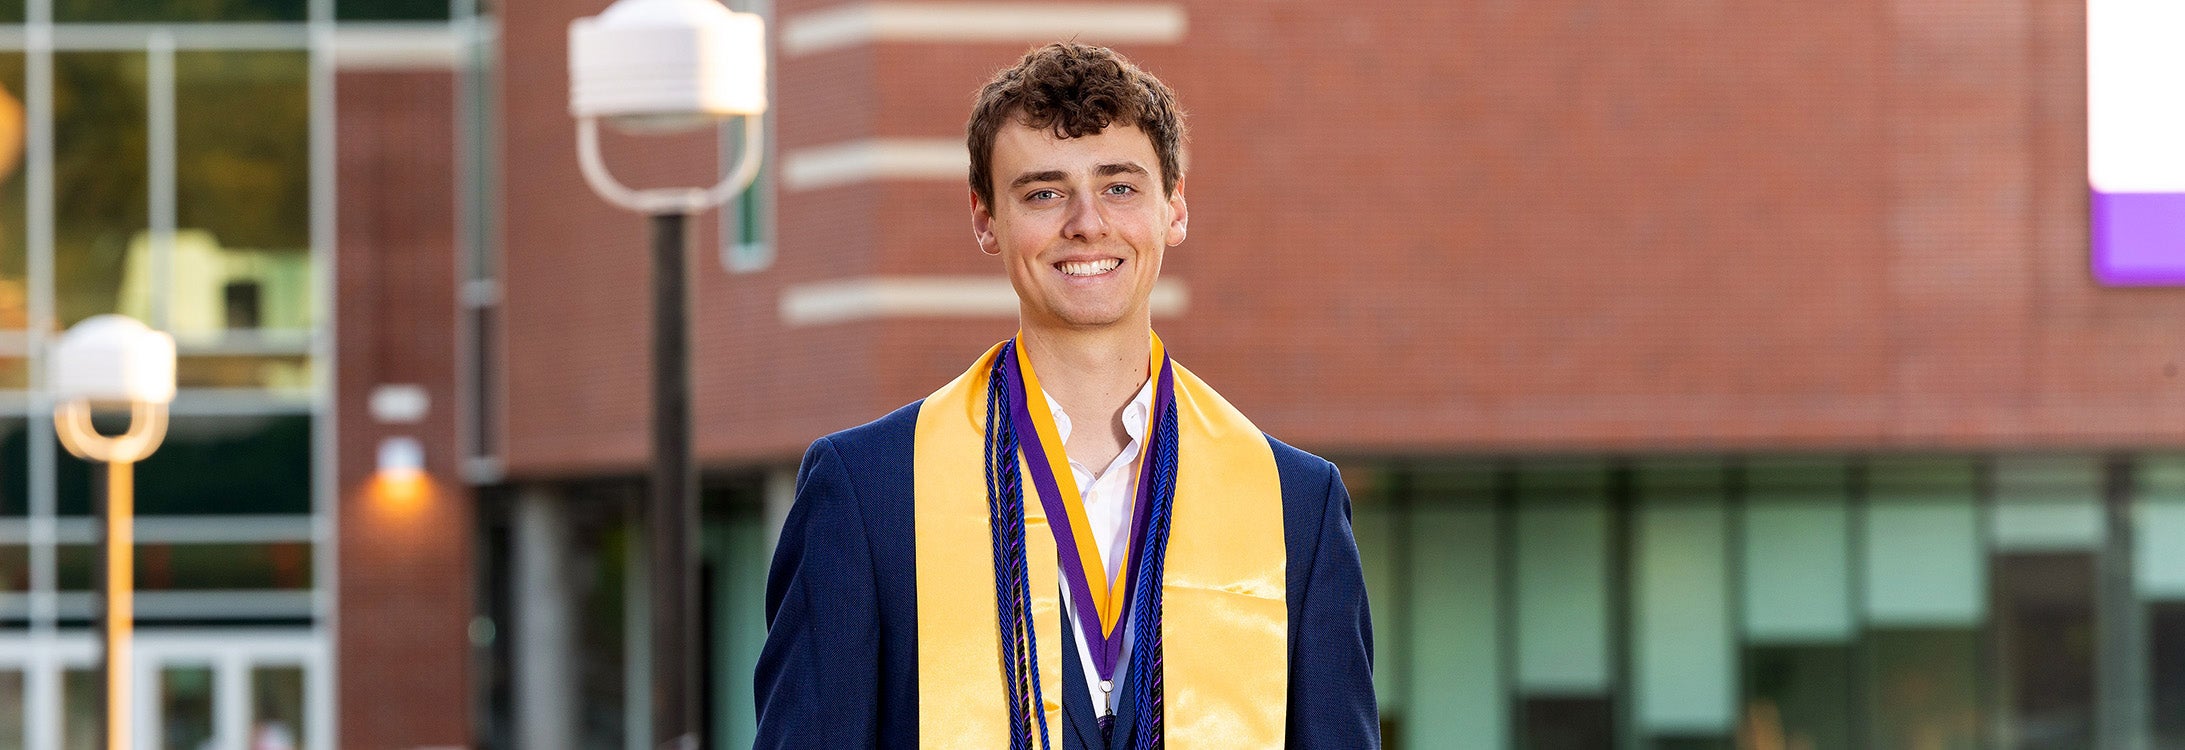 East Carolina University College of Business senior Grant Smith's entrepreneurship journey didn't begin at ECU, but he did refine the tools he'll use to flourish after graduation.